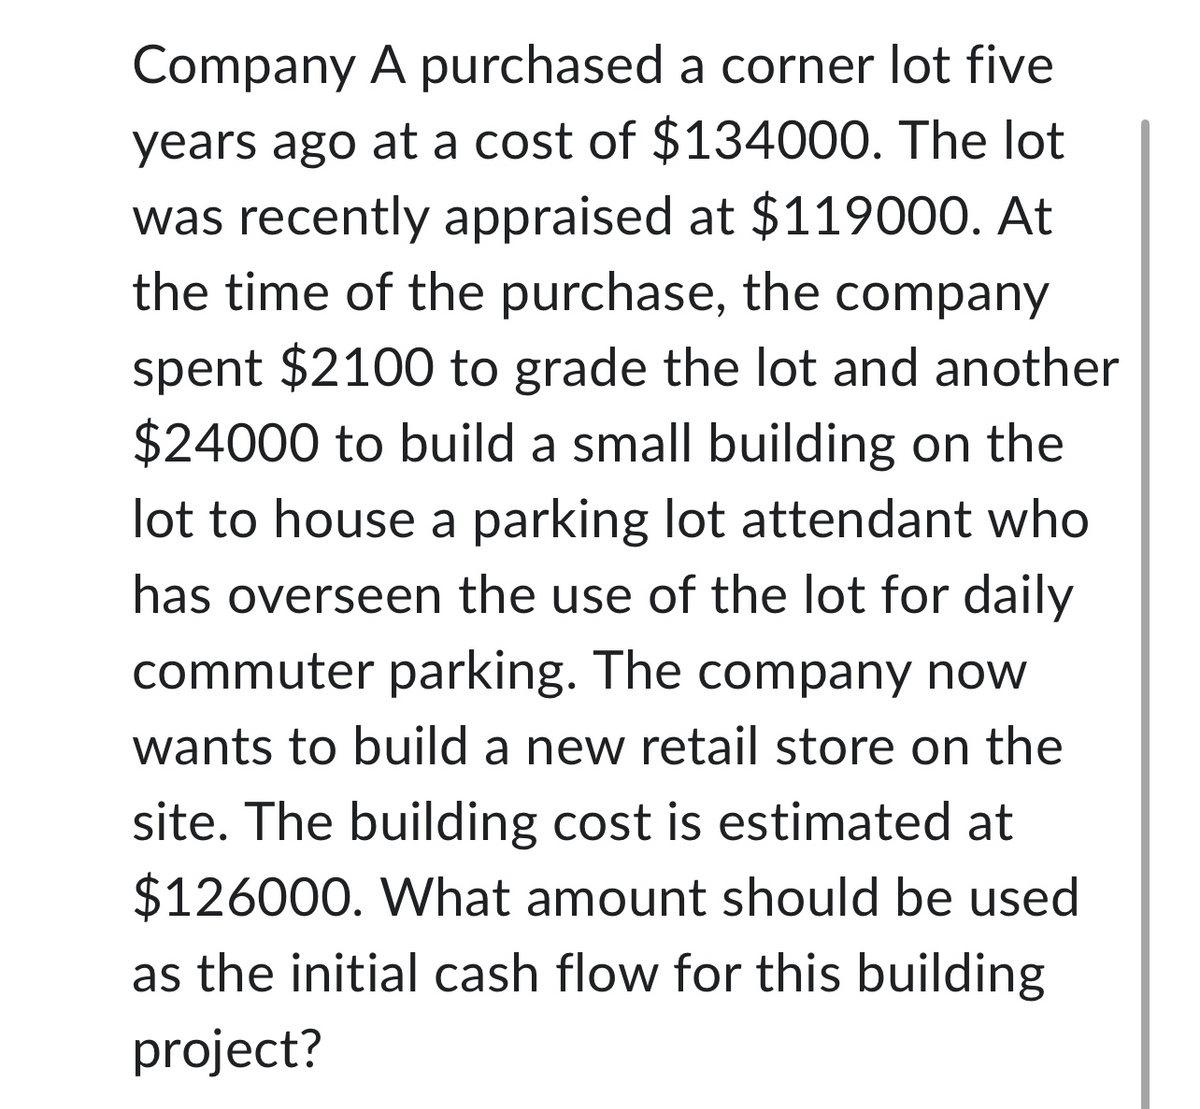 Company A purchased a corner lot five
years ago at a cost of $134000. The lot
was recently appraised at $119000. At
the time of the purchase, the company
spent $2100 to grade the lot and another
$24000 to build a small building on the
lot to house a parking lot attendant who
has overseen the use of the lot for daily
commuter parking. The company now
wants to build a new retail store on the
site. The building cost is estimated at
$126000. What amount should be used
as the initial cash flow for this building
project?